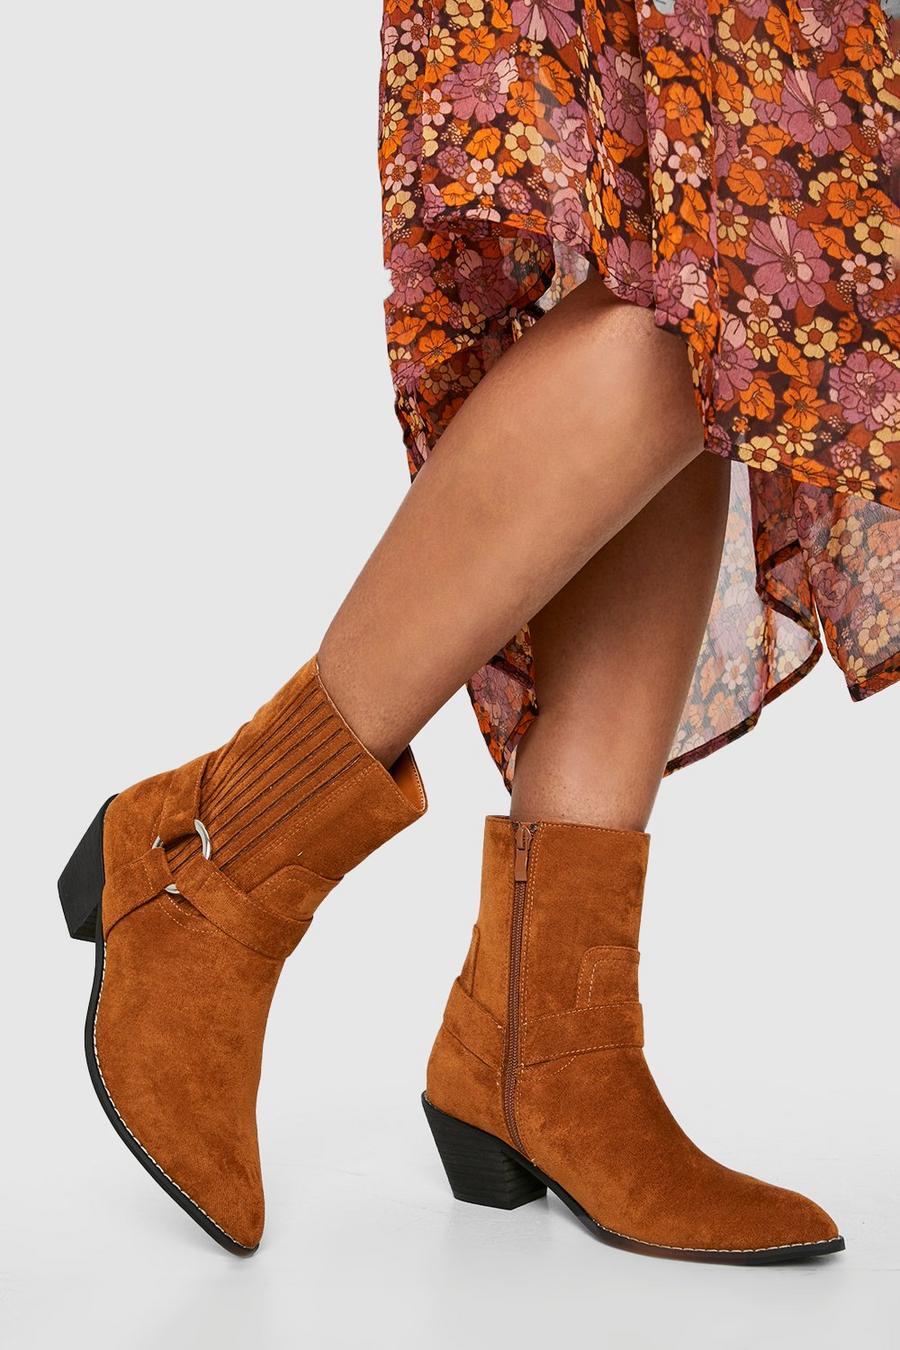 Harness Detail Western Cowboy Ankle Boots, Dark tan